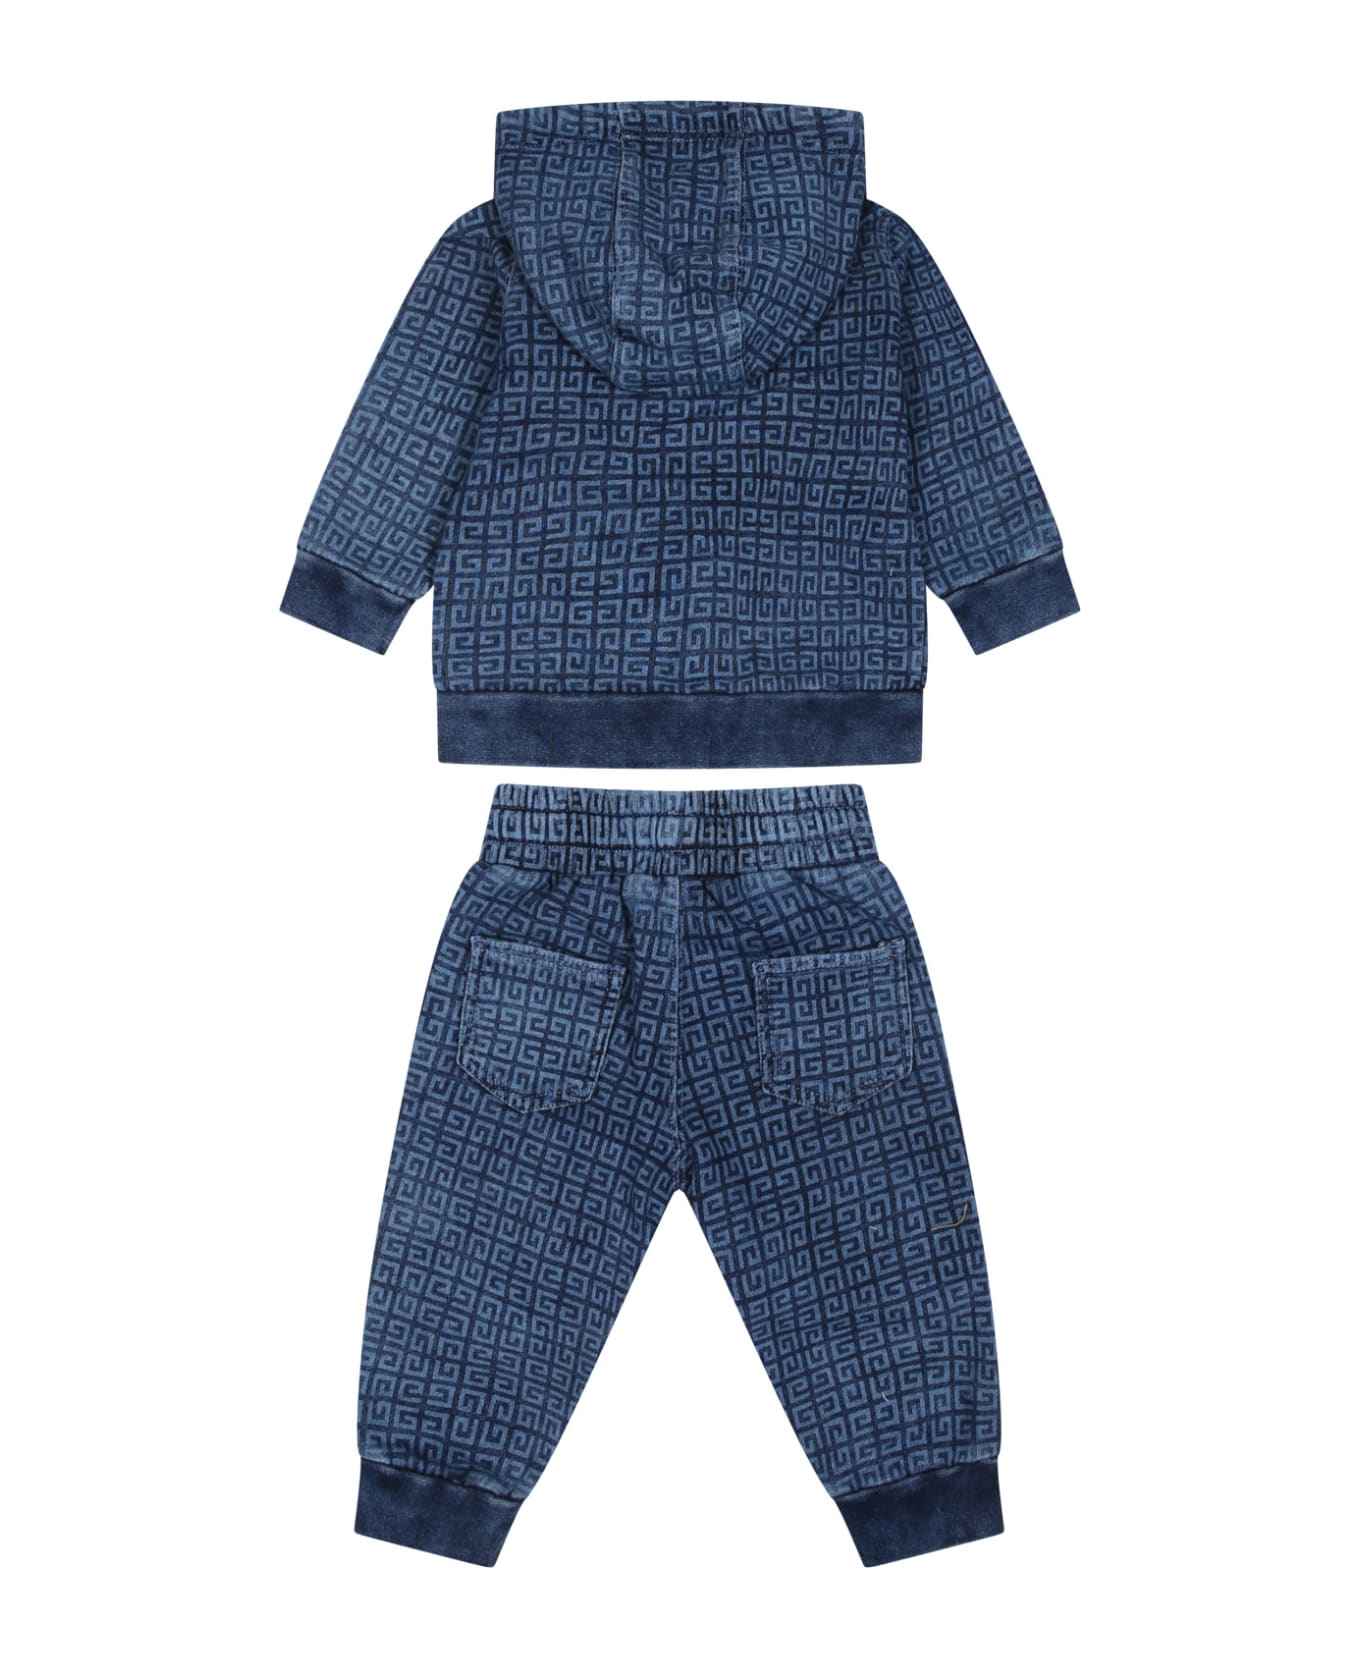 Givenchy Trunks Blue Suit For Baby Boy With 4g Motif - Blue